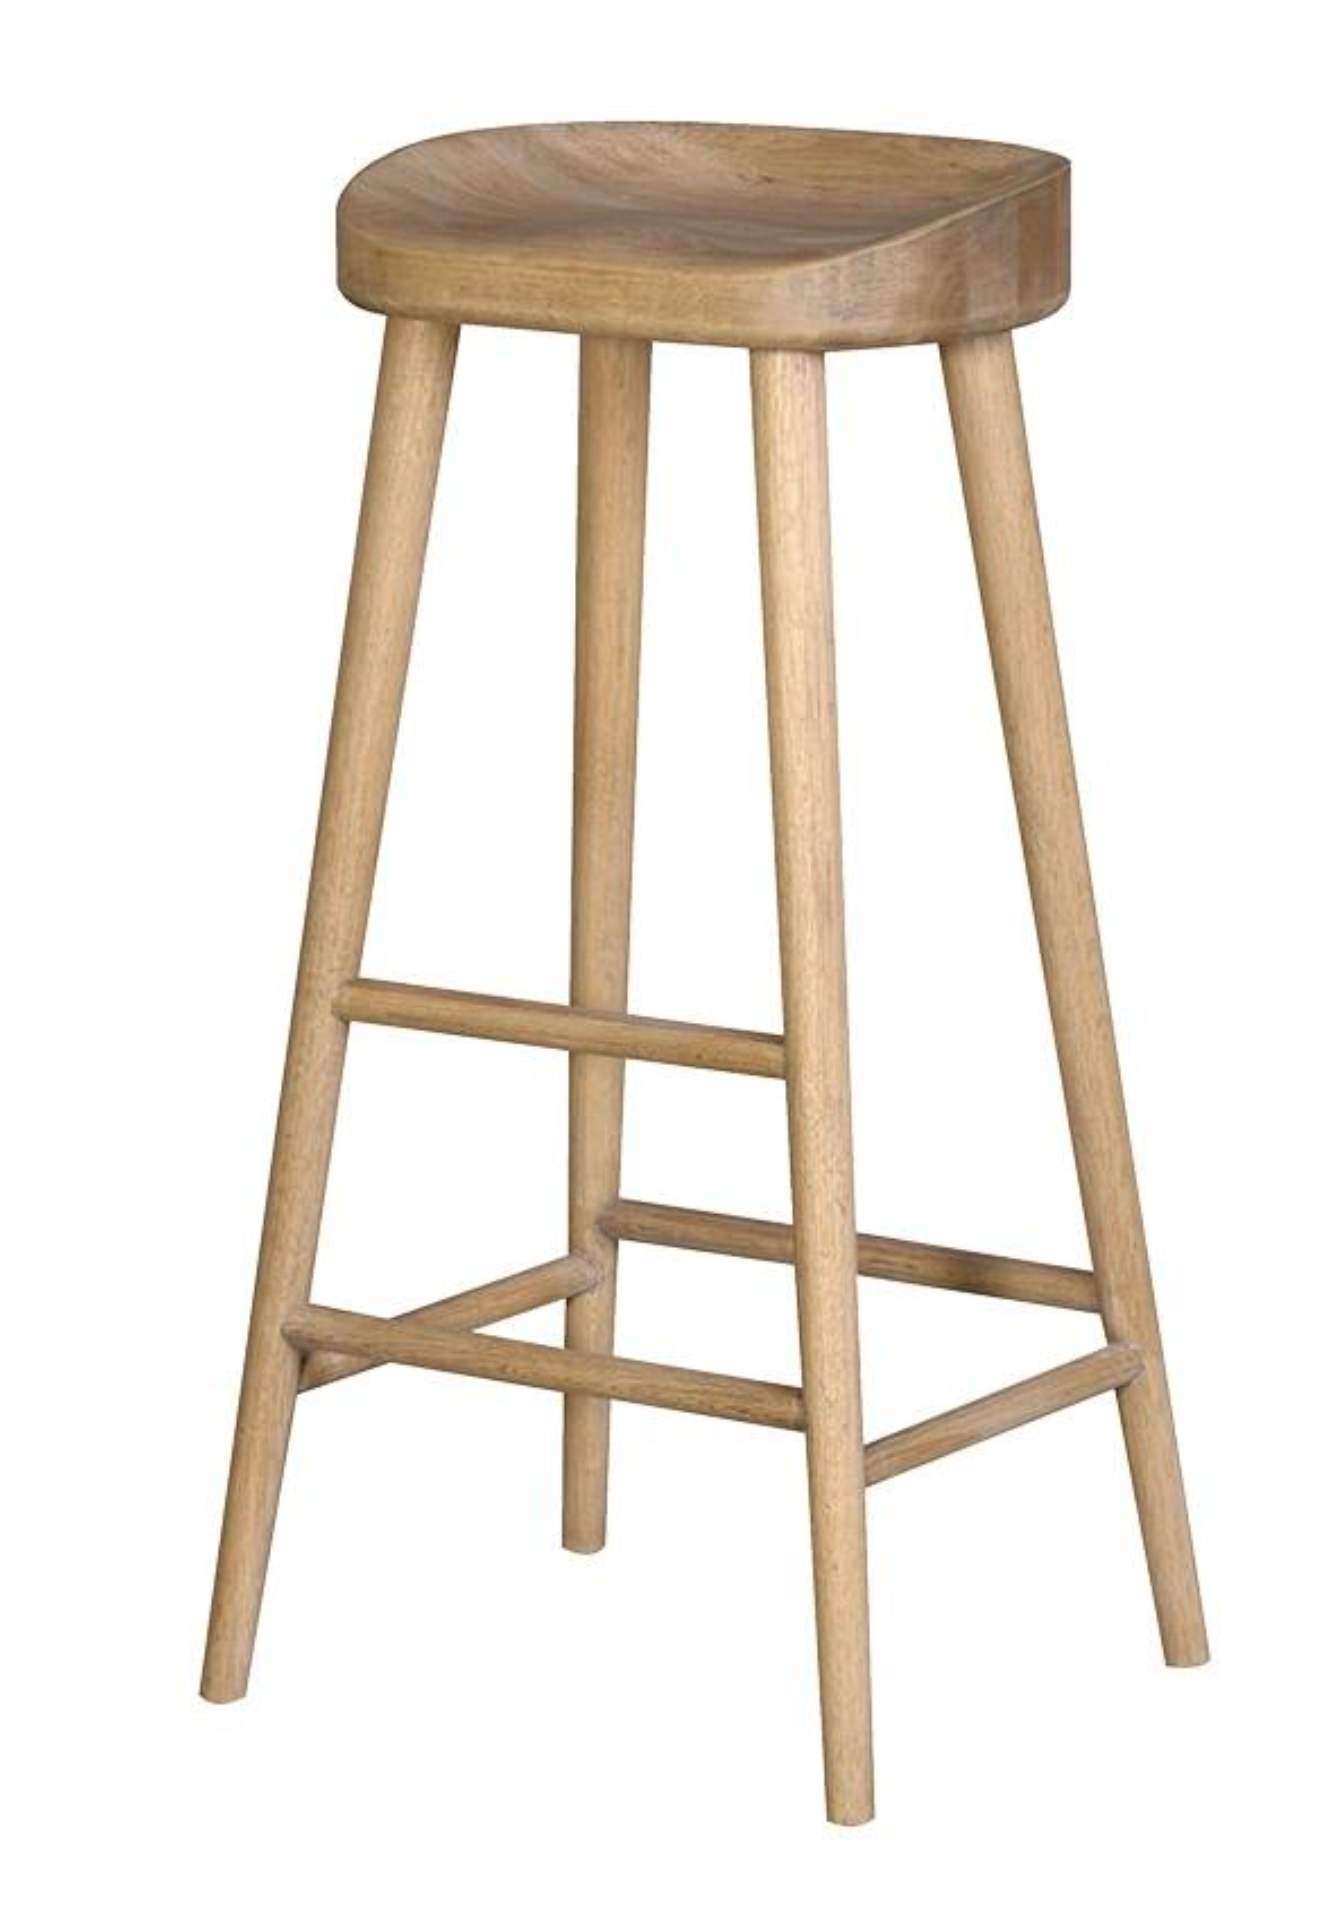 Weathered Oak Farmhouse Bar Stool- 4 Leg from Upstairs Downstairs Furniture in Lisburn, Monaghan and Enniskillen